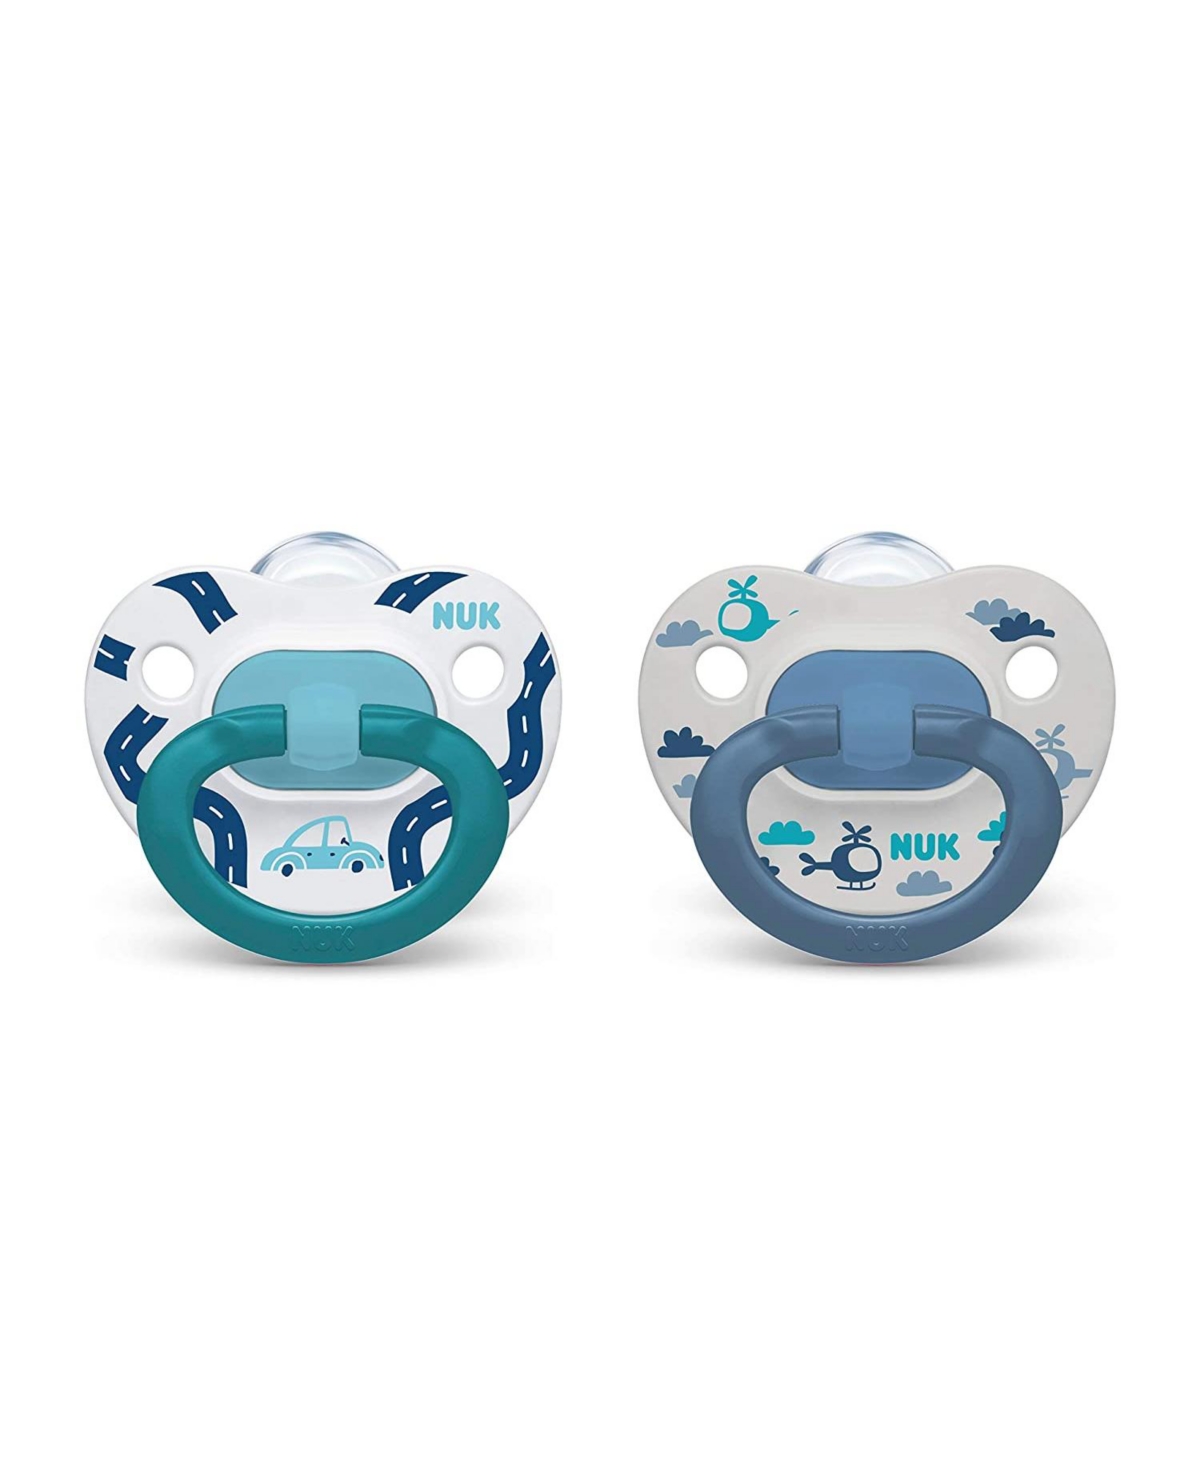 Nuk Orthodontic Pacifiers, 18-36 Months, Blue, 2 Pack